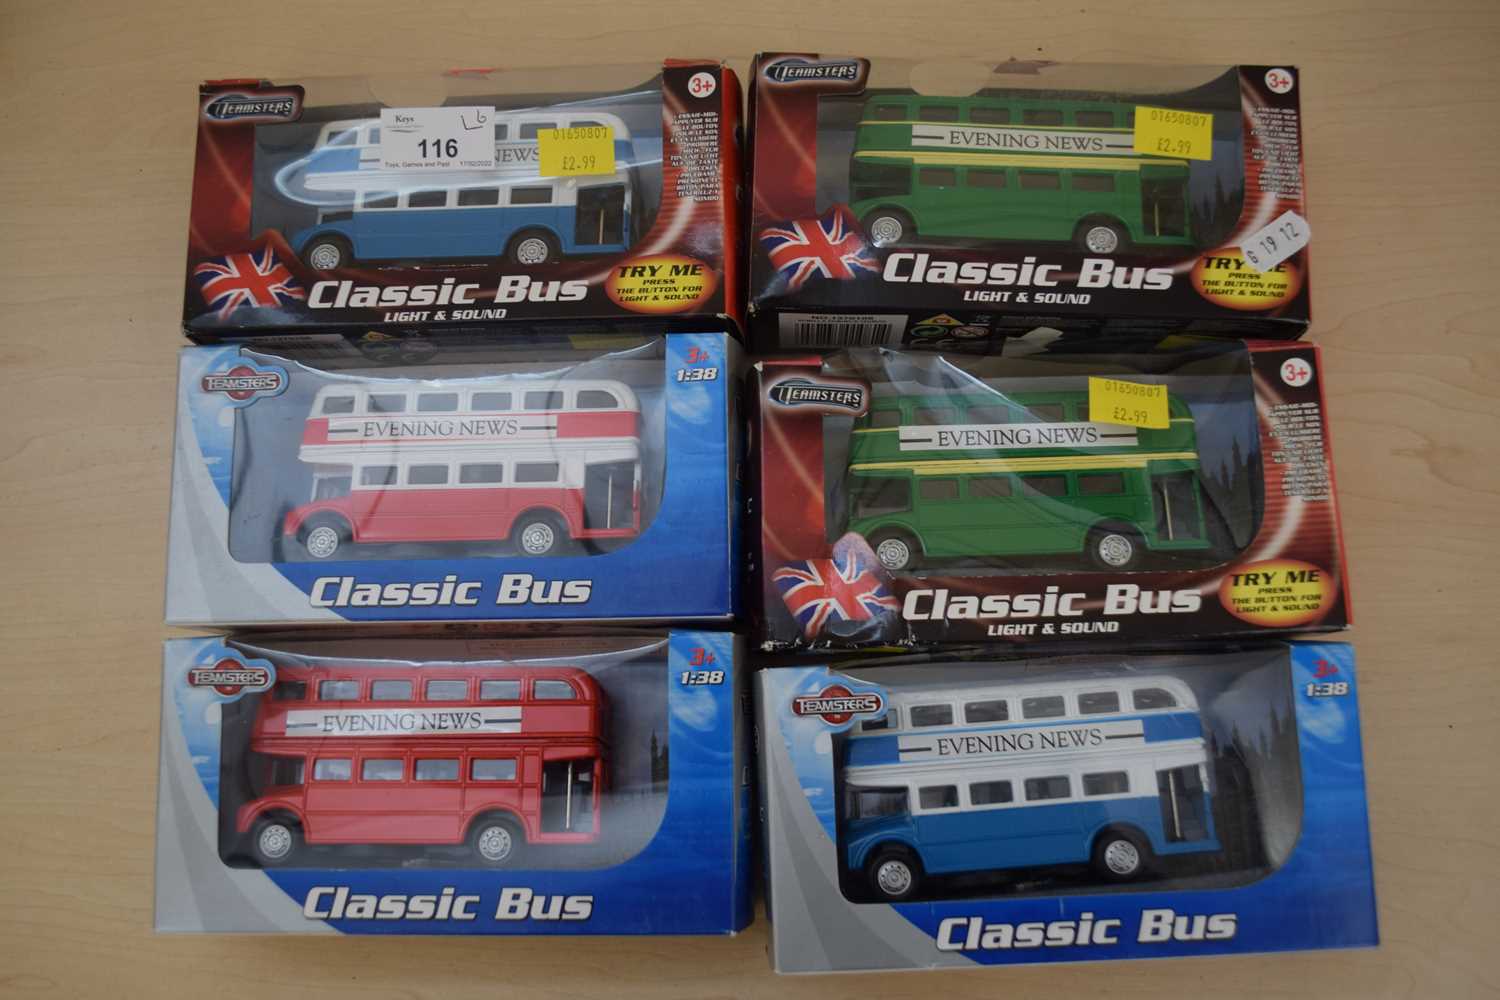 Teamsters group of six classic bus models, all displaying Evening News advertising in different